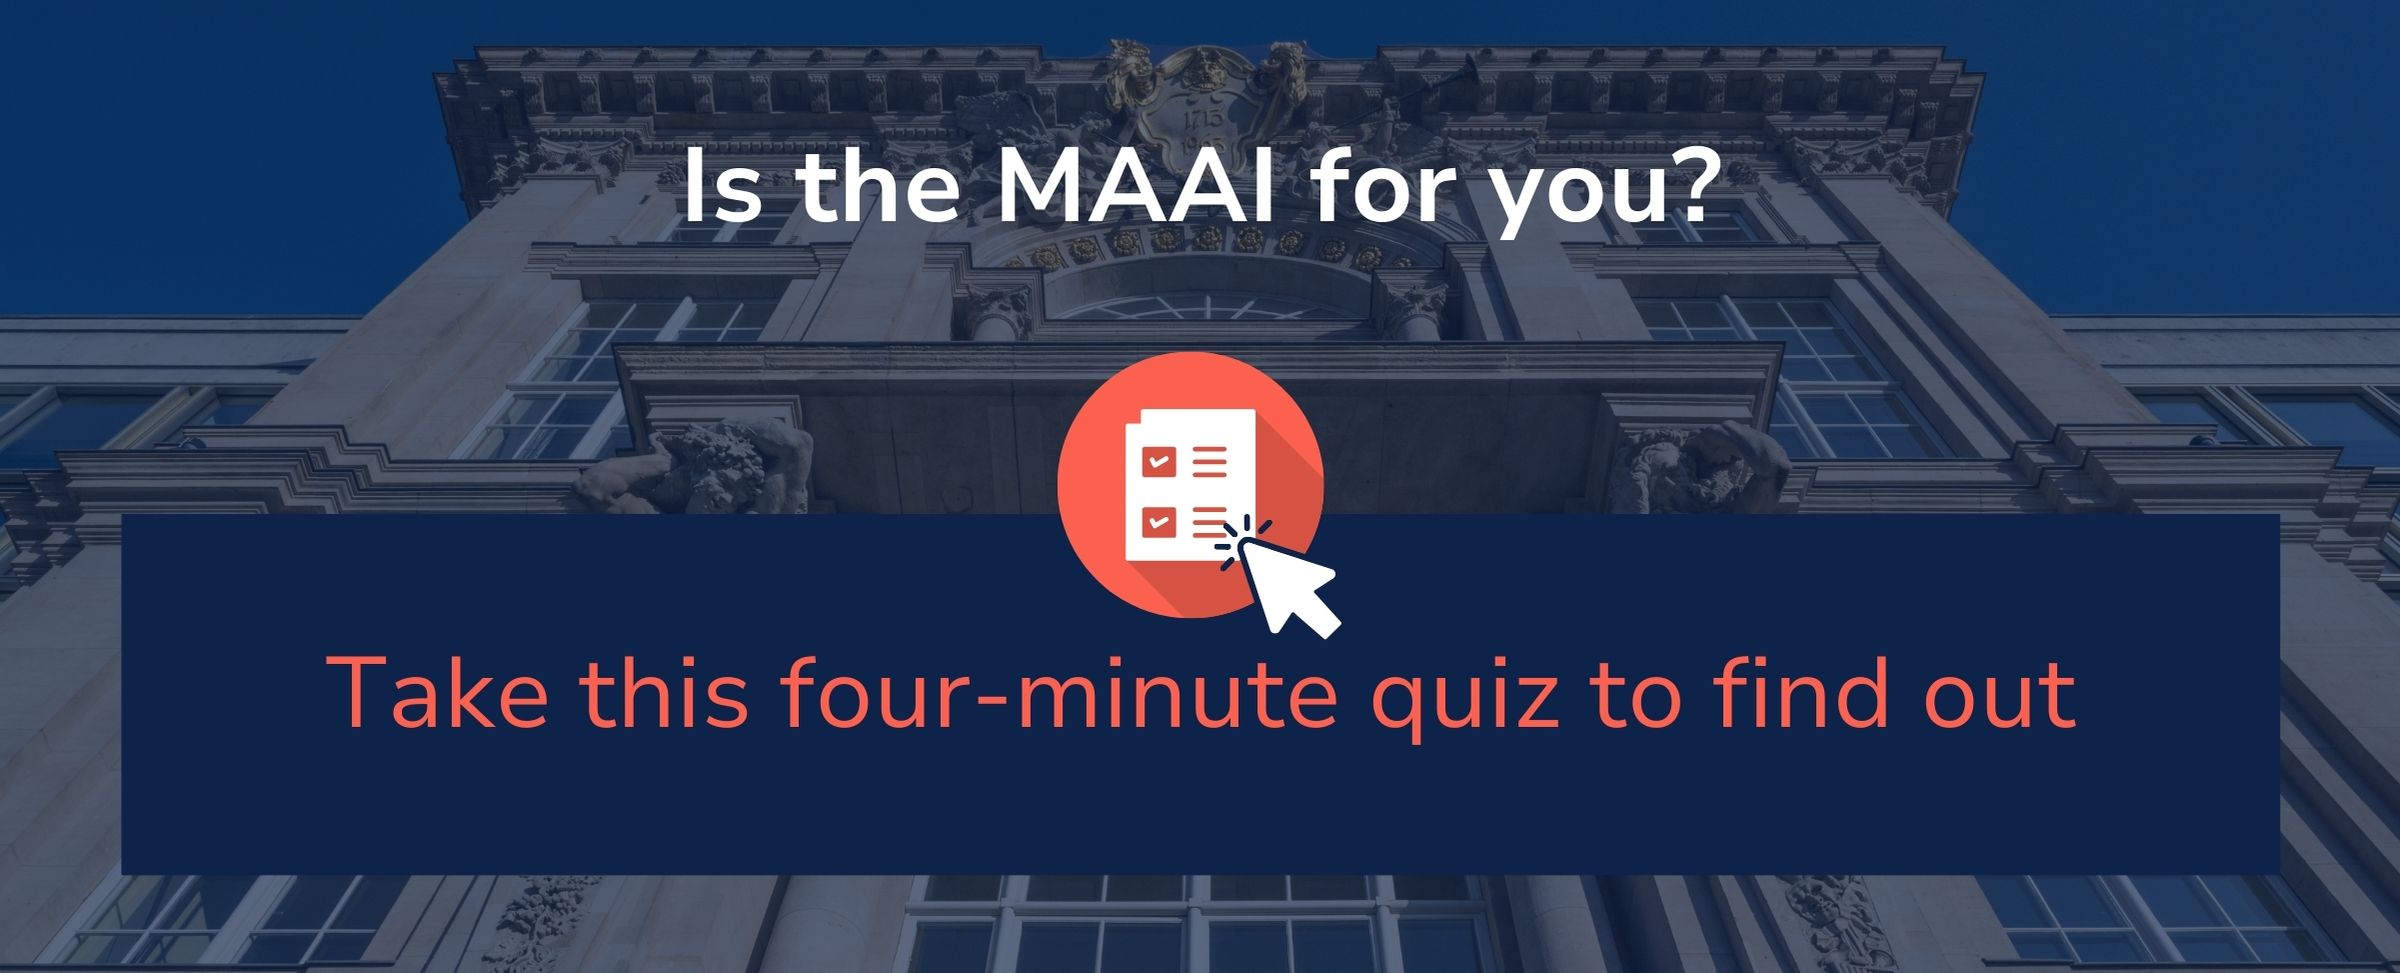 Is the MAAI for you? Take this quiz to find out. Image link